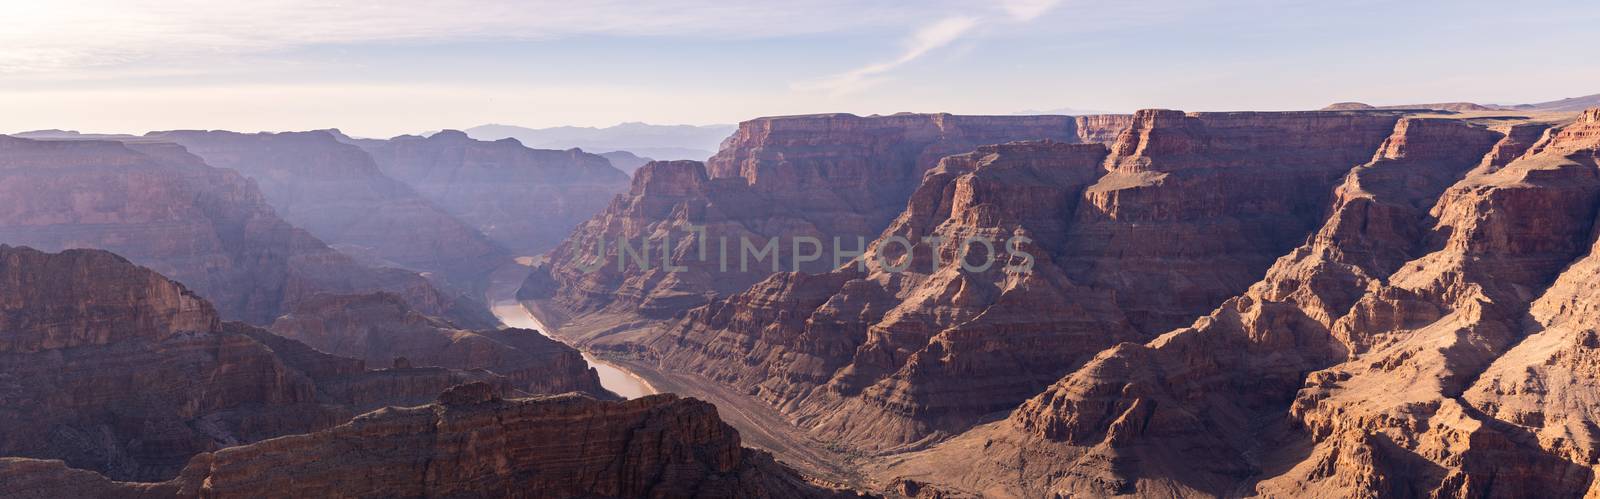 West rim of Grand Canyon Panorama by vichie81